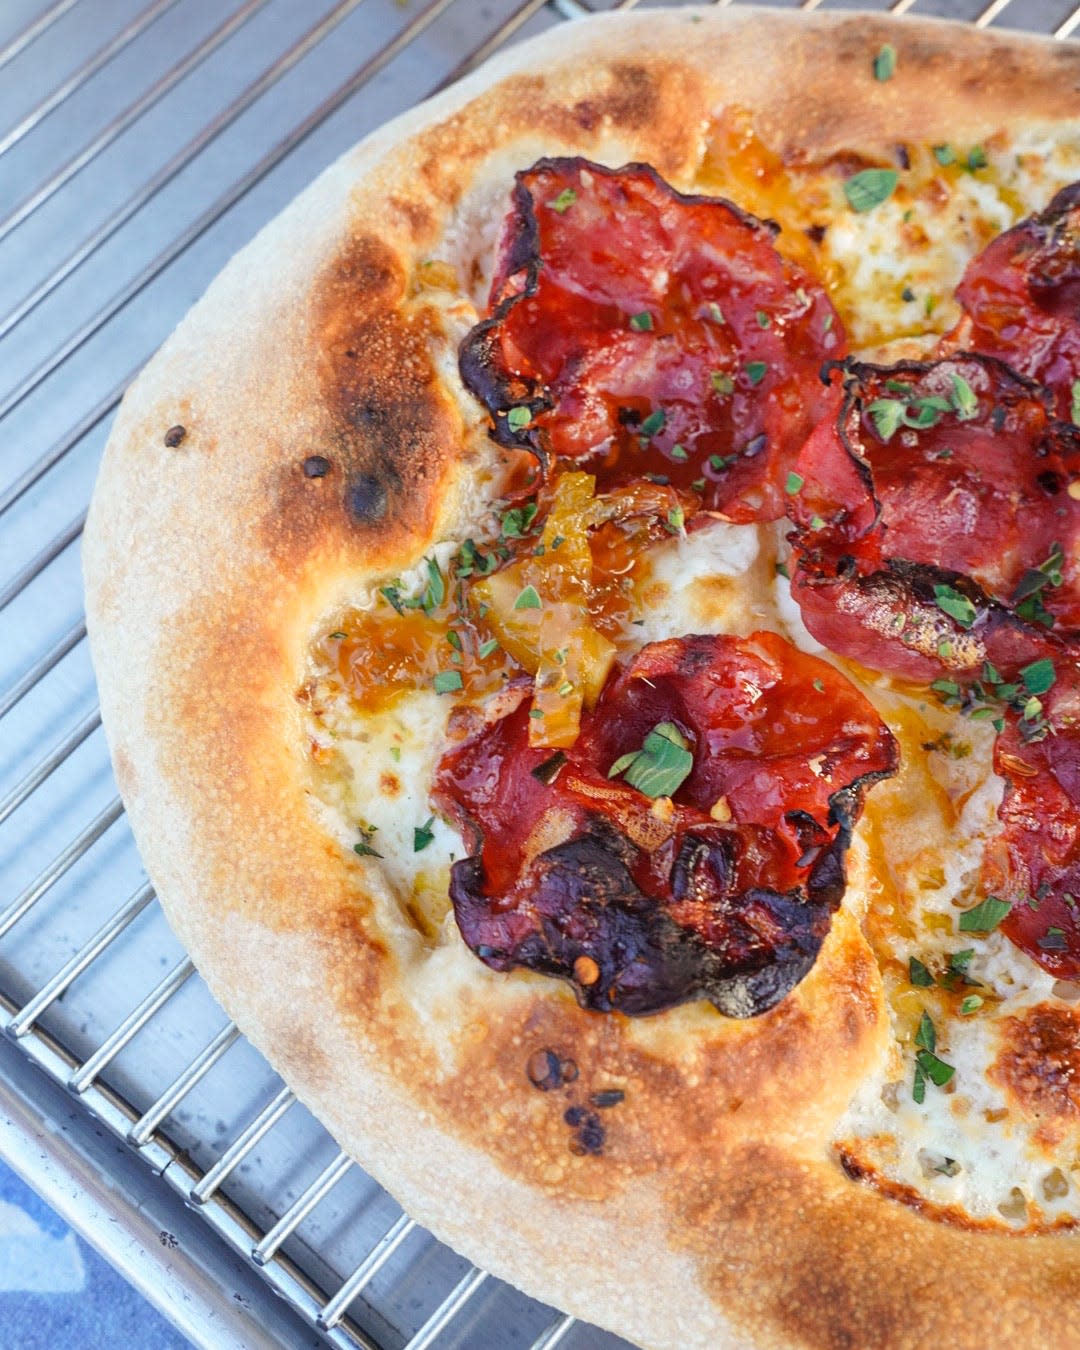 The owners of L'Oca d'Oro are opening casual pizzeria Bambino in 2024.